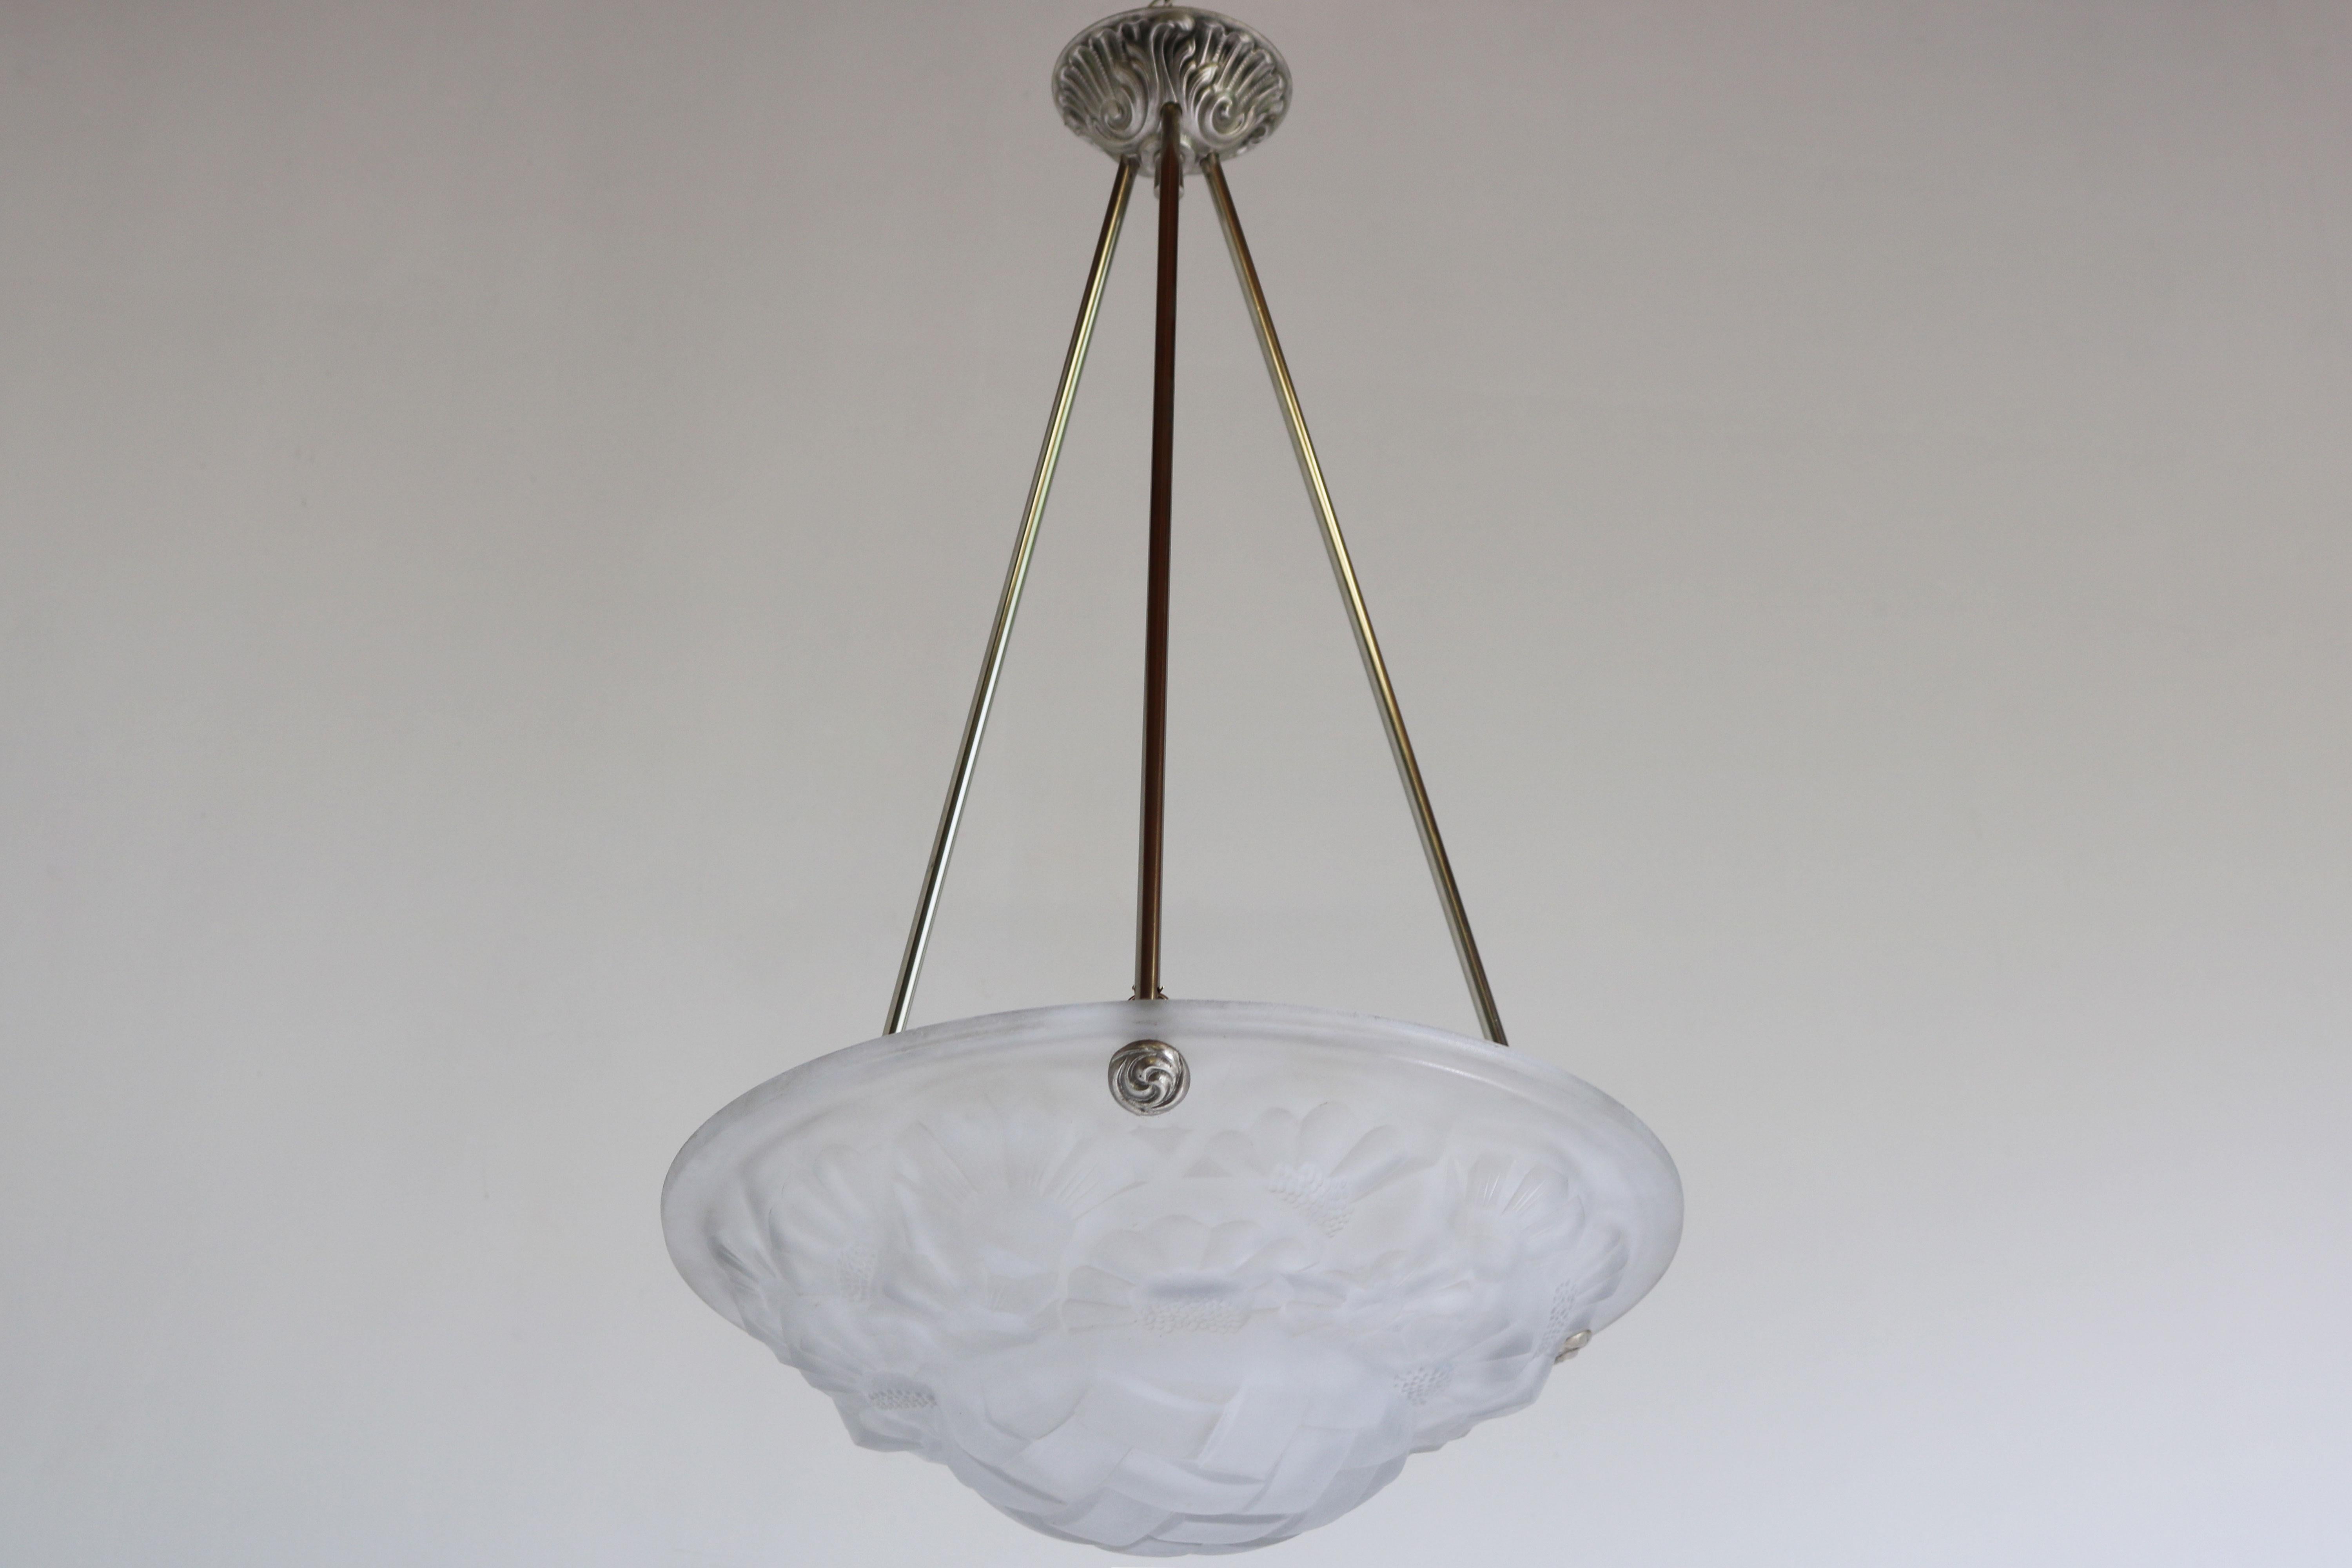 Hand-Crafted Art Deco Pendant / Chandelier by David Gueron Degue 1930 Frosted Glass White For Sale